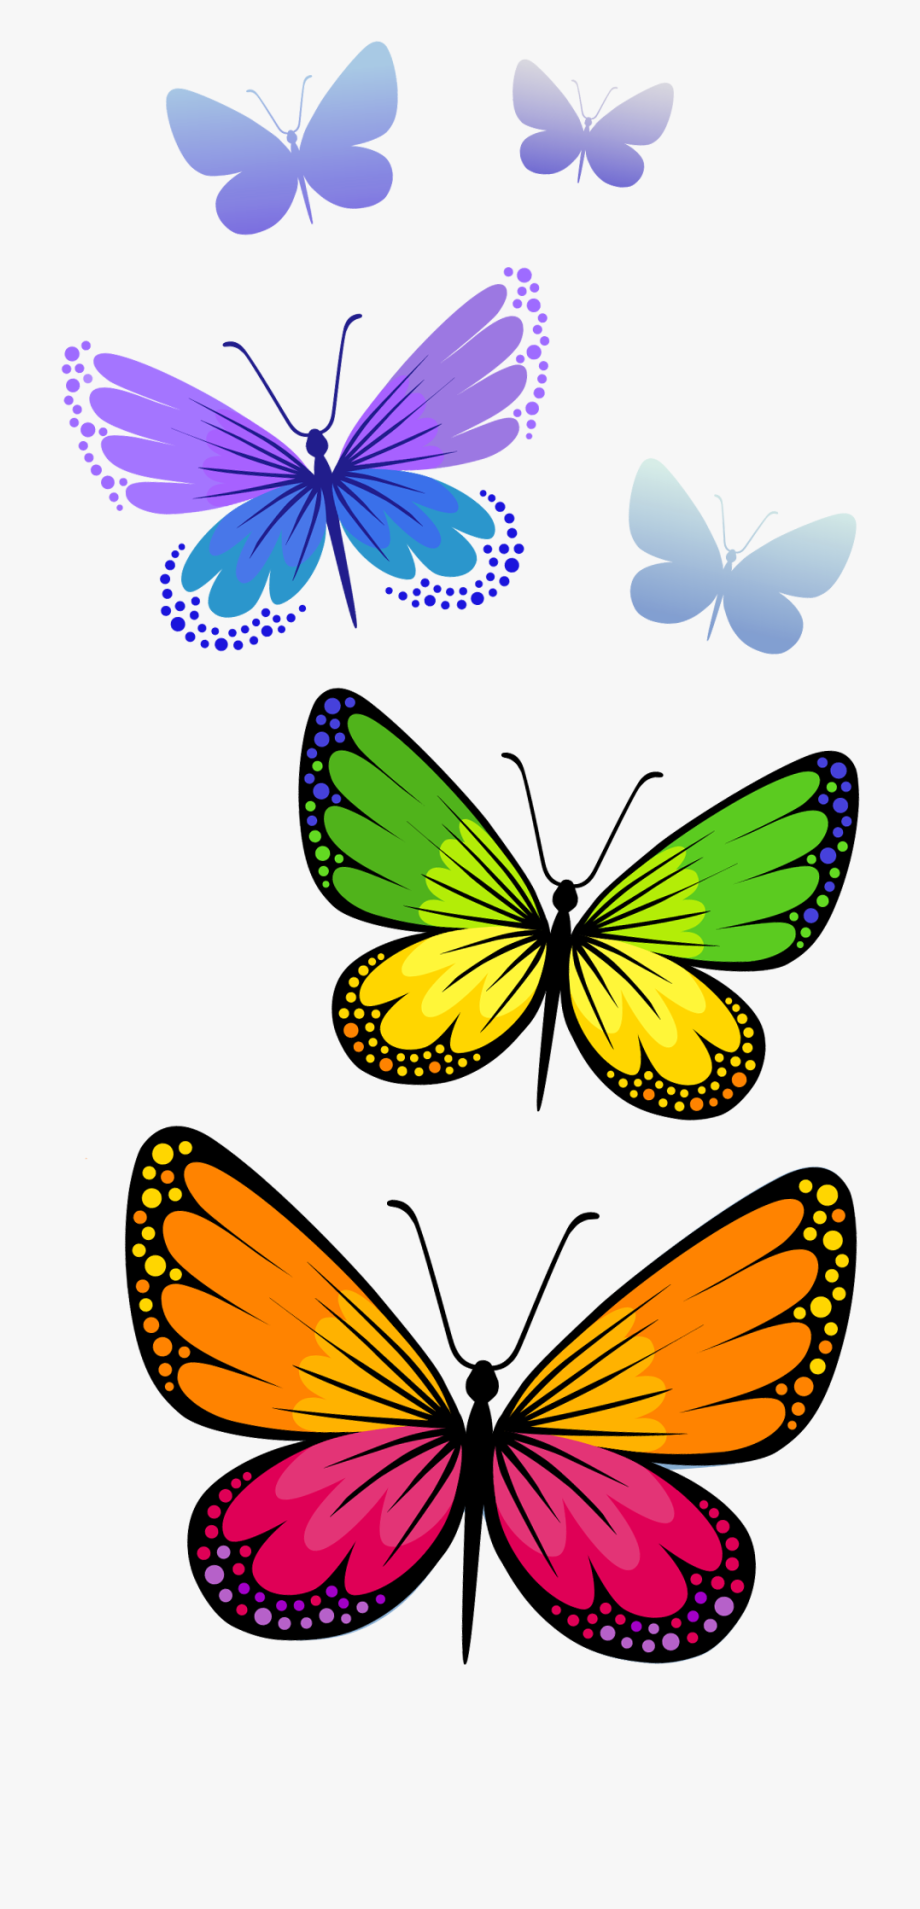 Download clipart png free download 20 free Cliparts | Download ...